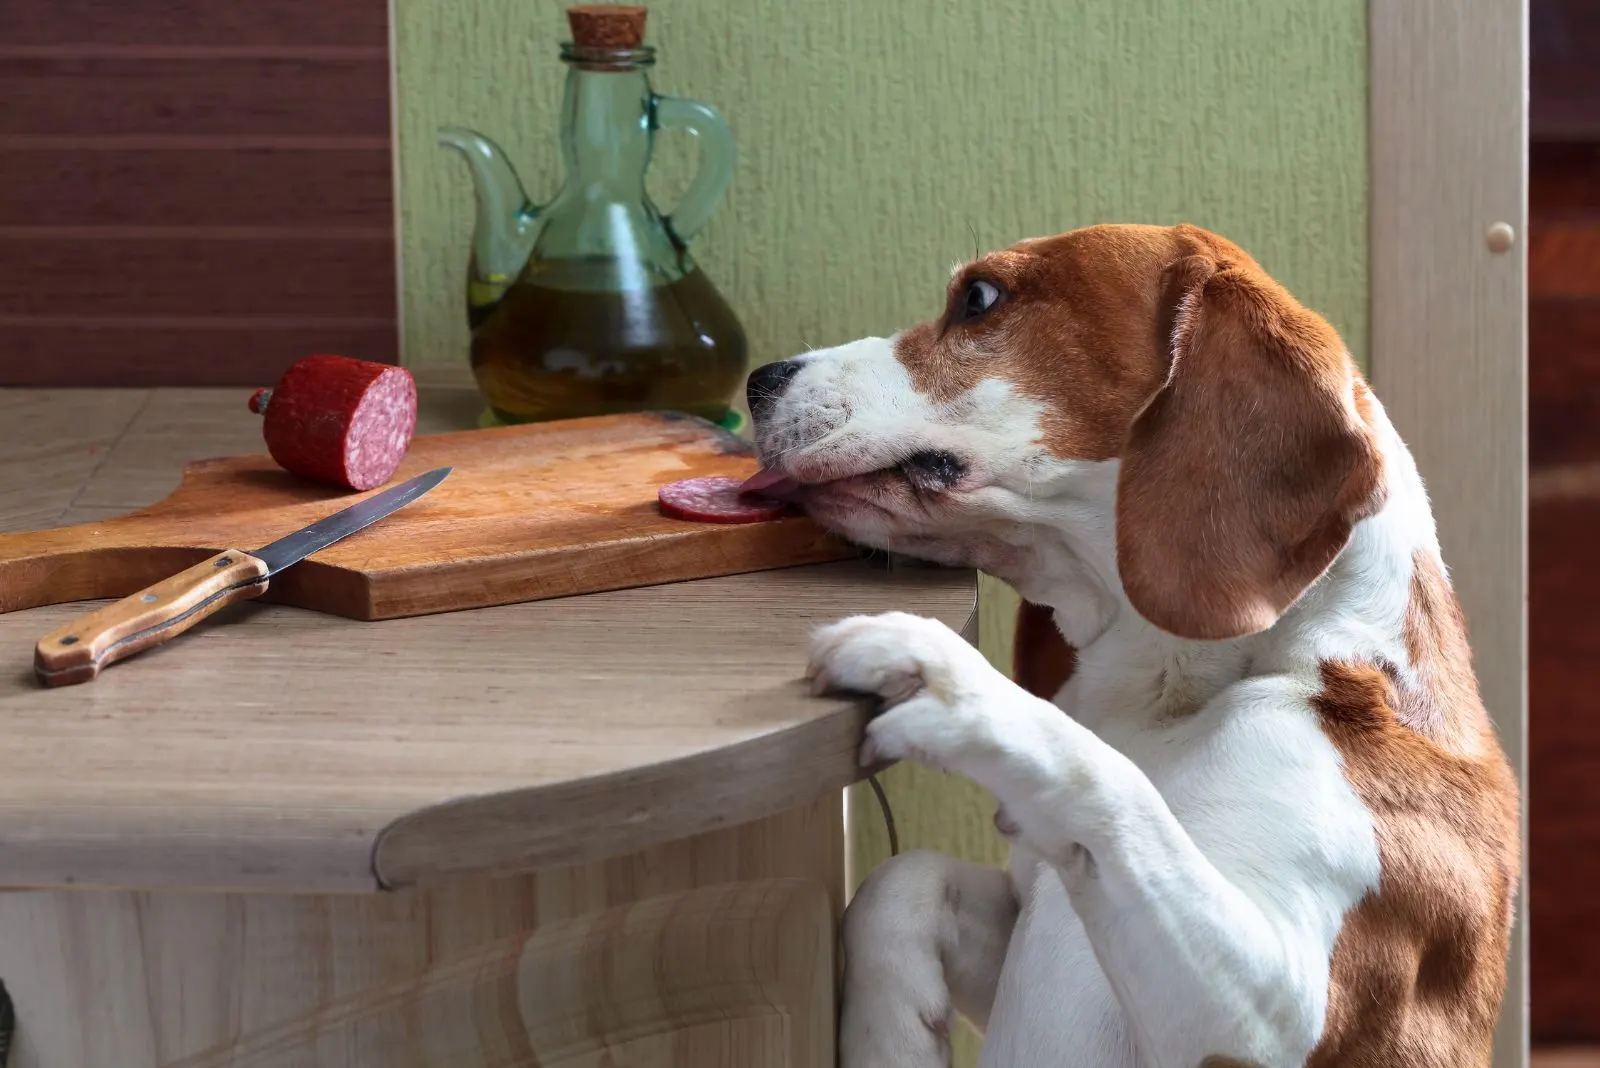 the dog steals food from the table